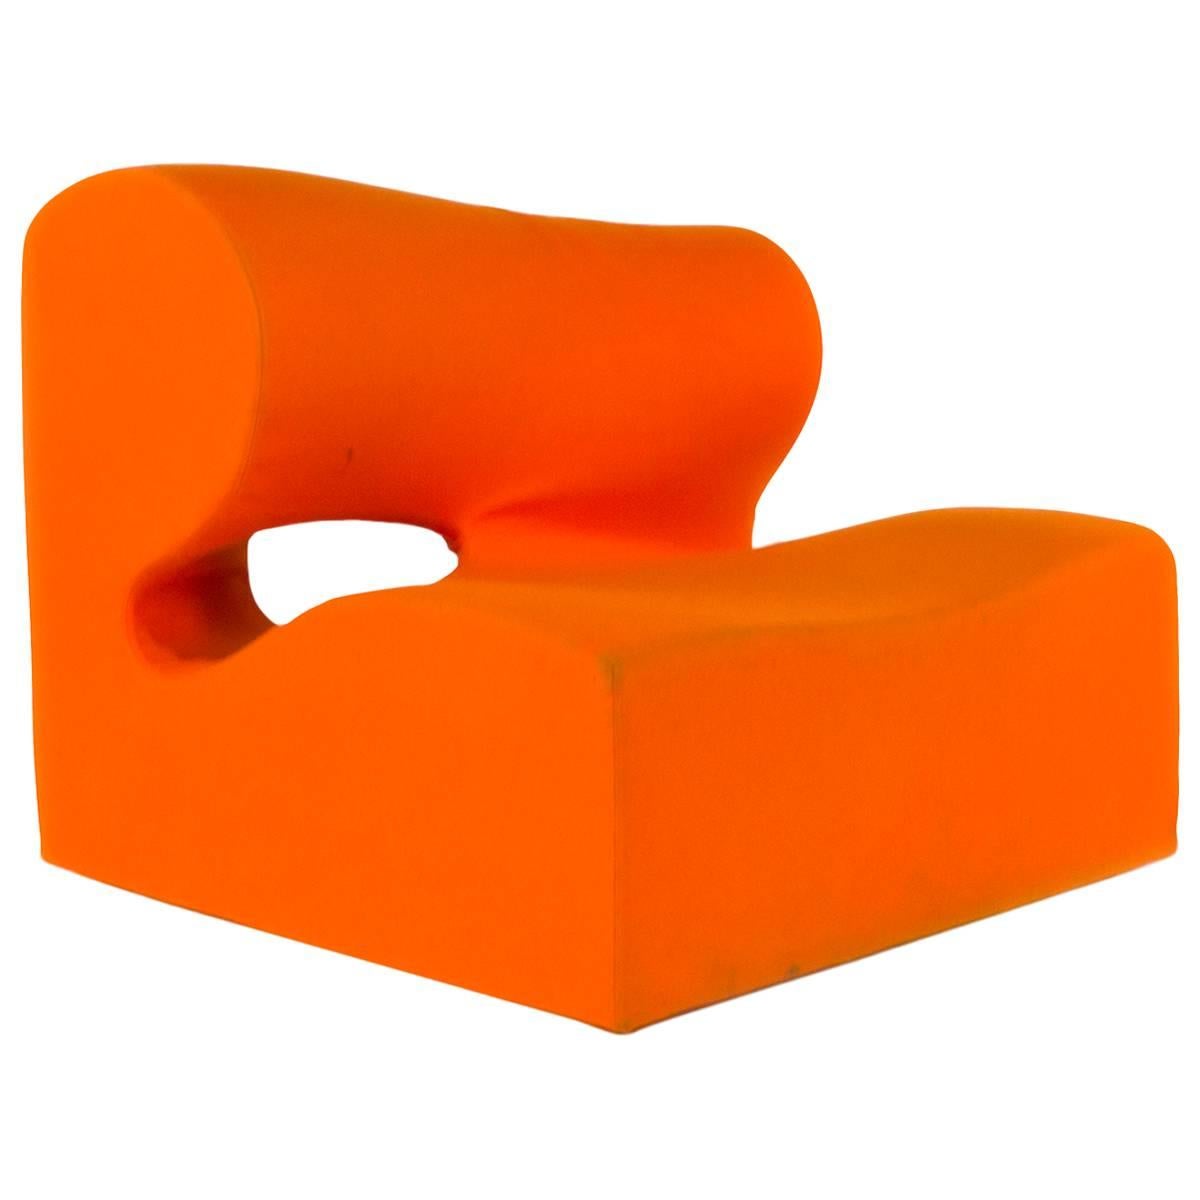 Moroso Orange Misfits Central 1 Modular Sectional Sofa Unit by Ron Arad, Italy For Sale